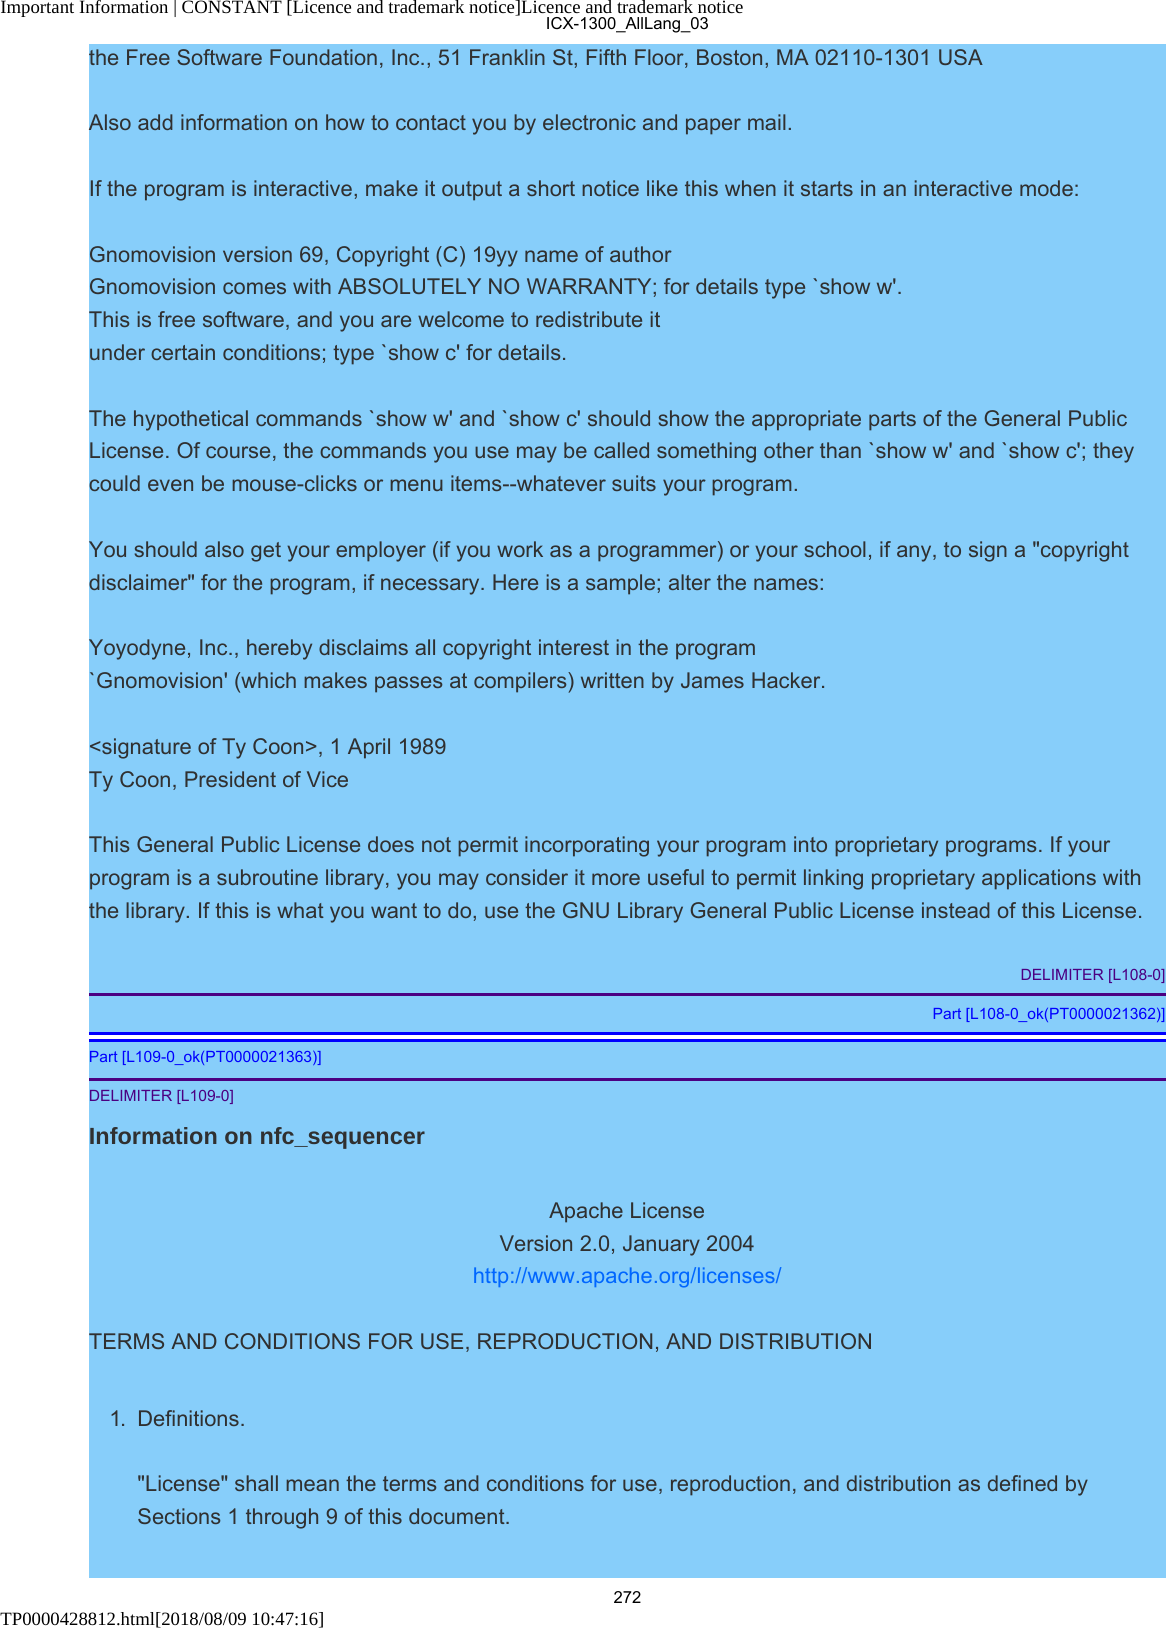 Important Information | CONSTANT [Licence and trademark notice]Licence and trademark noticeTP0000428812.html[2018/08/09 10:47:16]the Free Software Foundation, Inc., 51 Franklin St, Fifth Floor, Boston, MA 02110-1301 USAAlso add information on how to contact you by electronic and paper mail.If the program is interactive, make it output a short notice like this when it starts in an interactive mode:Gnomovision version 69, Copyright (C) 19yy name of authorGnomovision comes with ABSOLUTELY NO WARRANTY; for details type `show w&apos;.This is free software, and you are welcome to redistribute itunder certain conditions; type `show c&apos; for details.The hypothetical commands `show w&apos; and `show c&apos; should show the appropriate parts of the General PublicLicense. Of course, the commands you use may be called something other than `show w&apos; and `show c&apos;; theycould even be mouse-clicks or menu items--whatever suits your program.You should also get your employer (if you work as a programmer) or your school, if any, to sign a &quot;copyrightdisclaimer&quot; for the program, if necessary. Here is a sample; alter the names:Yoyodyne, Inc., hereby disclaims all copyright interest in the program`Gnomovision&apos; (which makes passes at compilers) written by James Hacker.&lt;signature of Ty Coon&gt;, 1 April 1989 Ty Coon, President of ViceThis General Public License does not permit incorporating your program into proprietary programs. If yourprogram is a subroutine library, you may consider it more useful to permit linking proprietary applications withthe library. If this is what you want to do, use the GNU Library General Public License instead of this License.DELIMITER [L108-0]Part [L108-0_ok(PT0000021362)]Part [L109-0_ok(PT0000021363)]DELIMITER [L109-0]Information on nfc_sequencerApache LicenseVersion 2.0, January 2004http://www.apache.org/licenses/TERMS AND CONDITIONS FOR USE, REPRODUCTION, AND DISTRIBUTION1.  Definitions.&quot;License&quot; shall mean the terms and conditions for use, reproduction, and distribution as defined bySections 1 through 9 of this document.ICX-1300_AllLang_03272